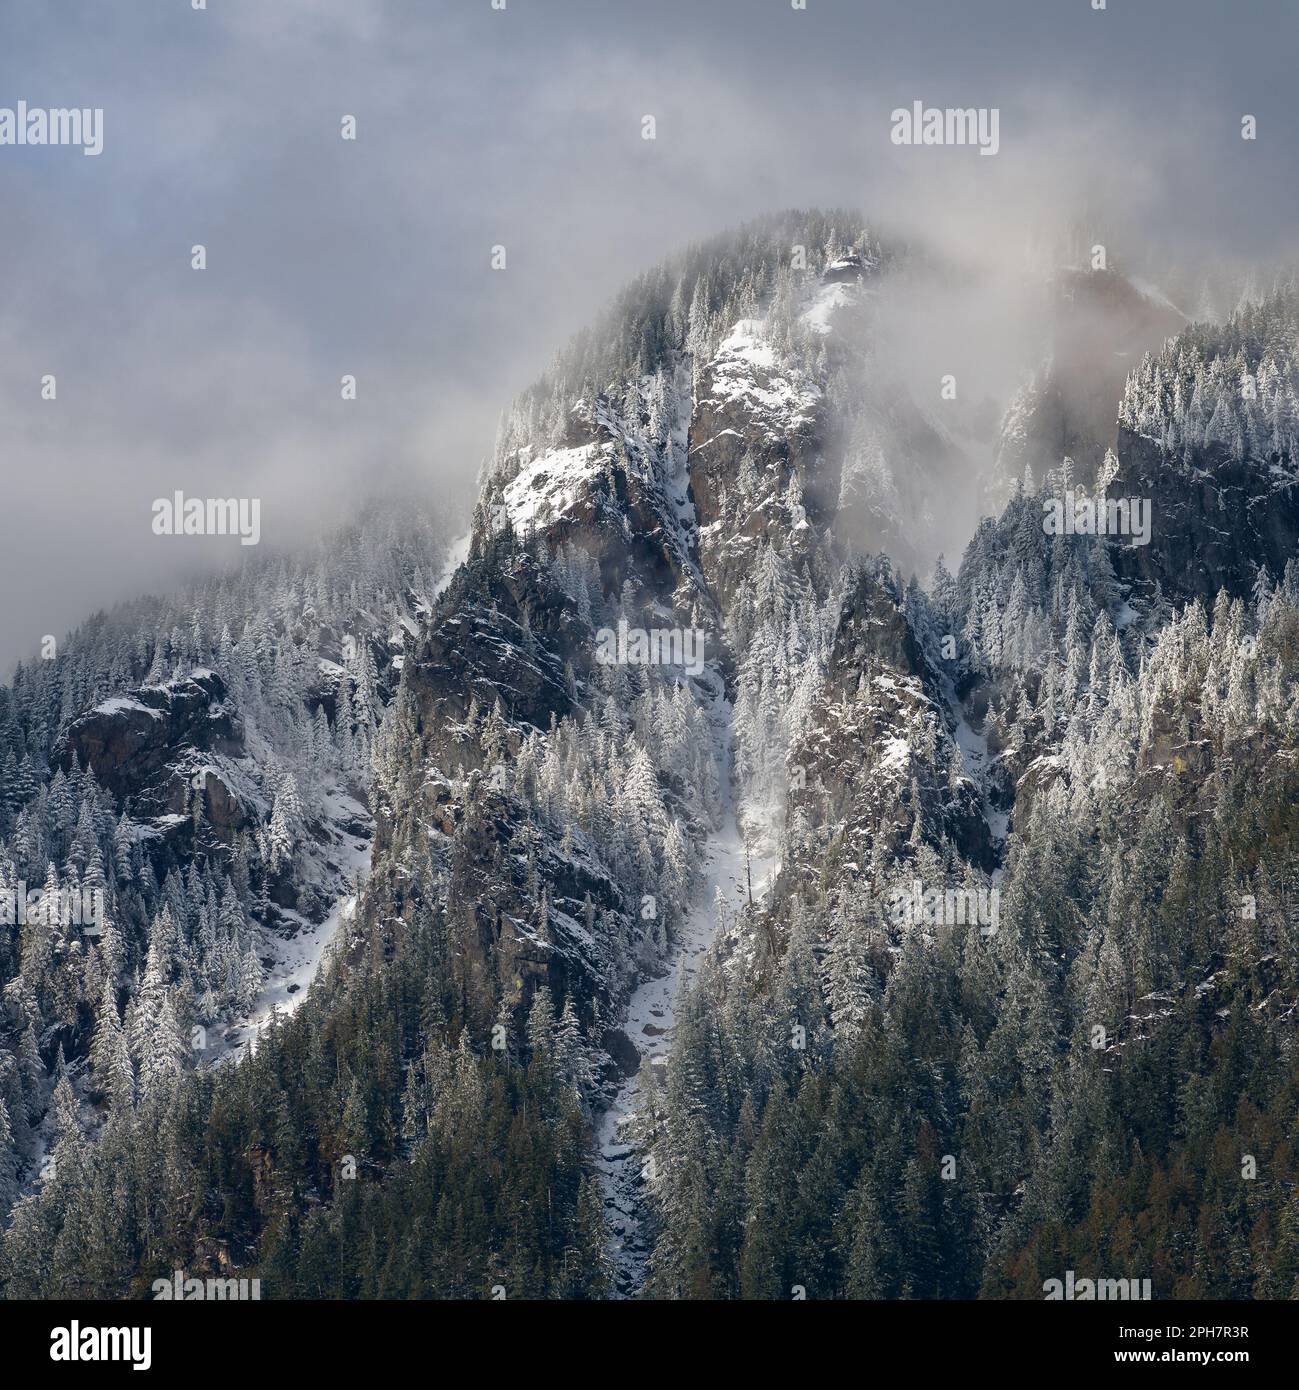 Snow on forested mountainside with low cloud on peak in Washington Cascade Mountains Stock Photo